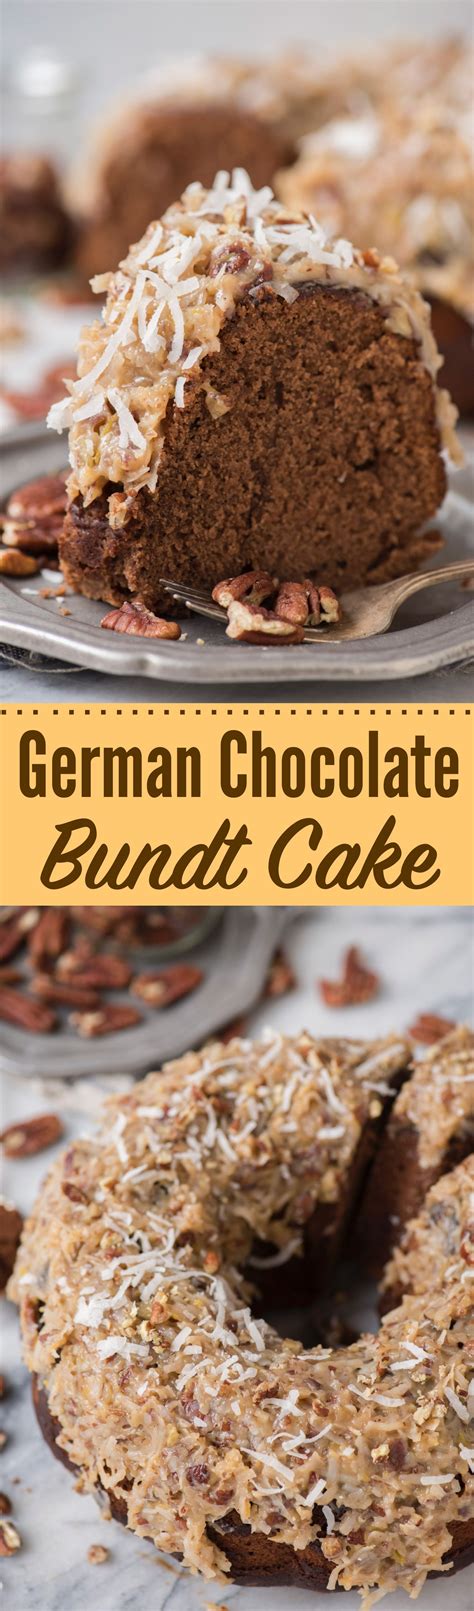 The cake is plenty sweet with all that delicious frosting. Rich and chocolatey german chocolate bundt cake with ...